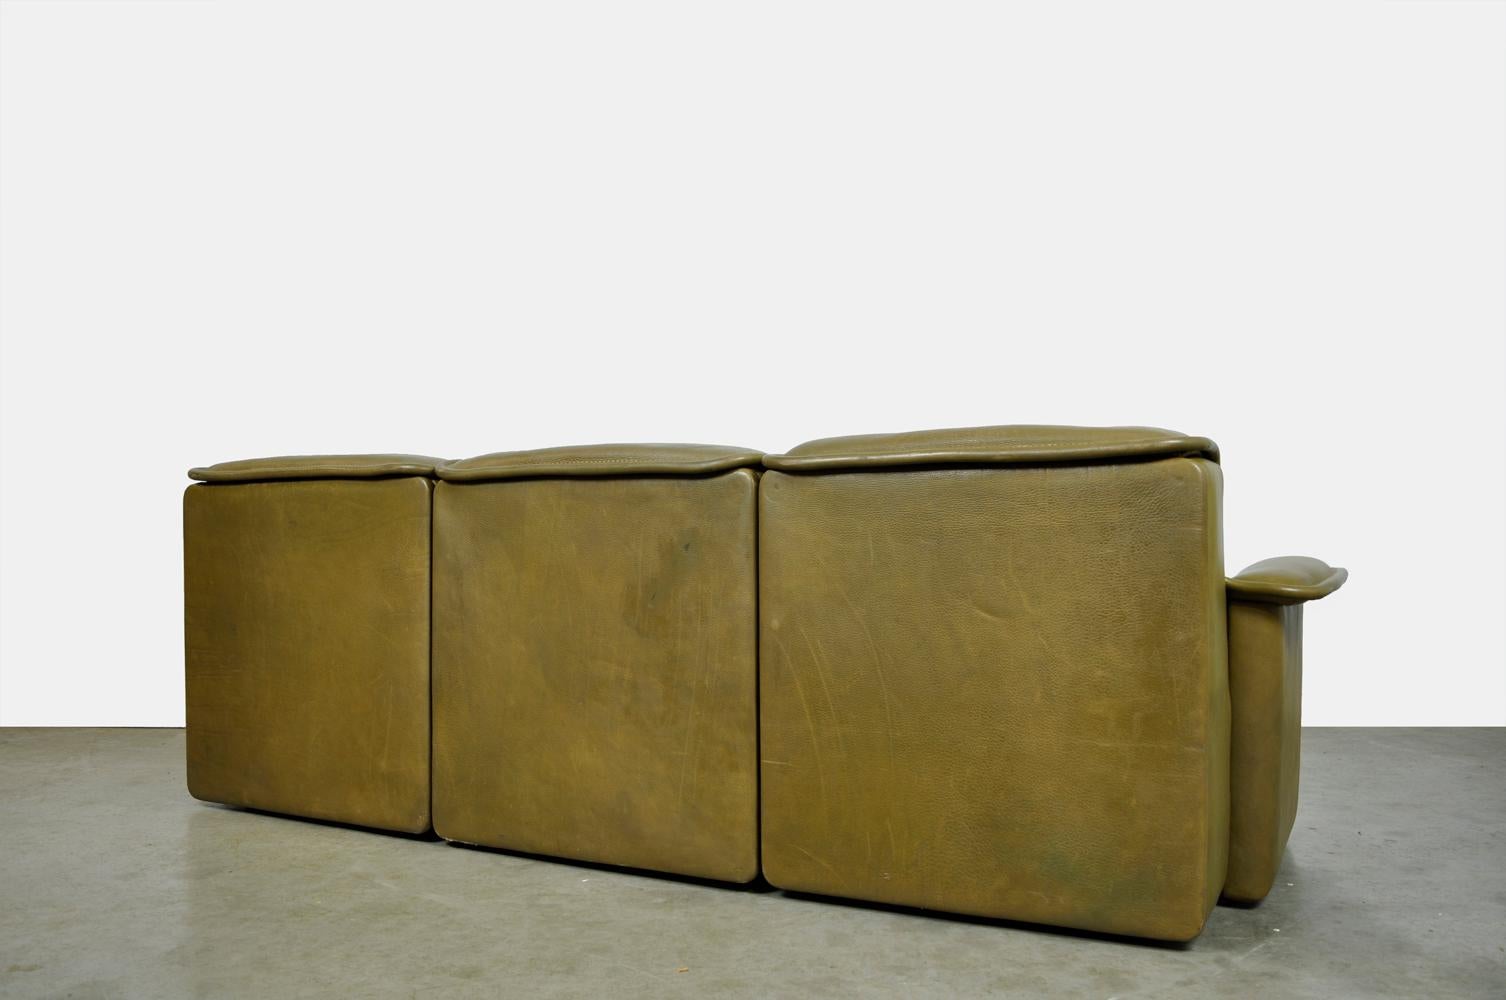 Mid-Century Modern Olive Colored Leather 3-Seater Sofa, Model Ds-12 by De Sede, 1970s Switzerland For Sale